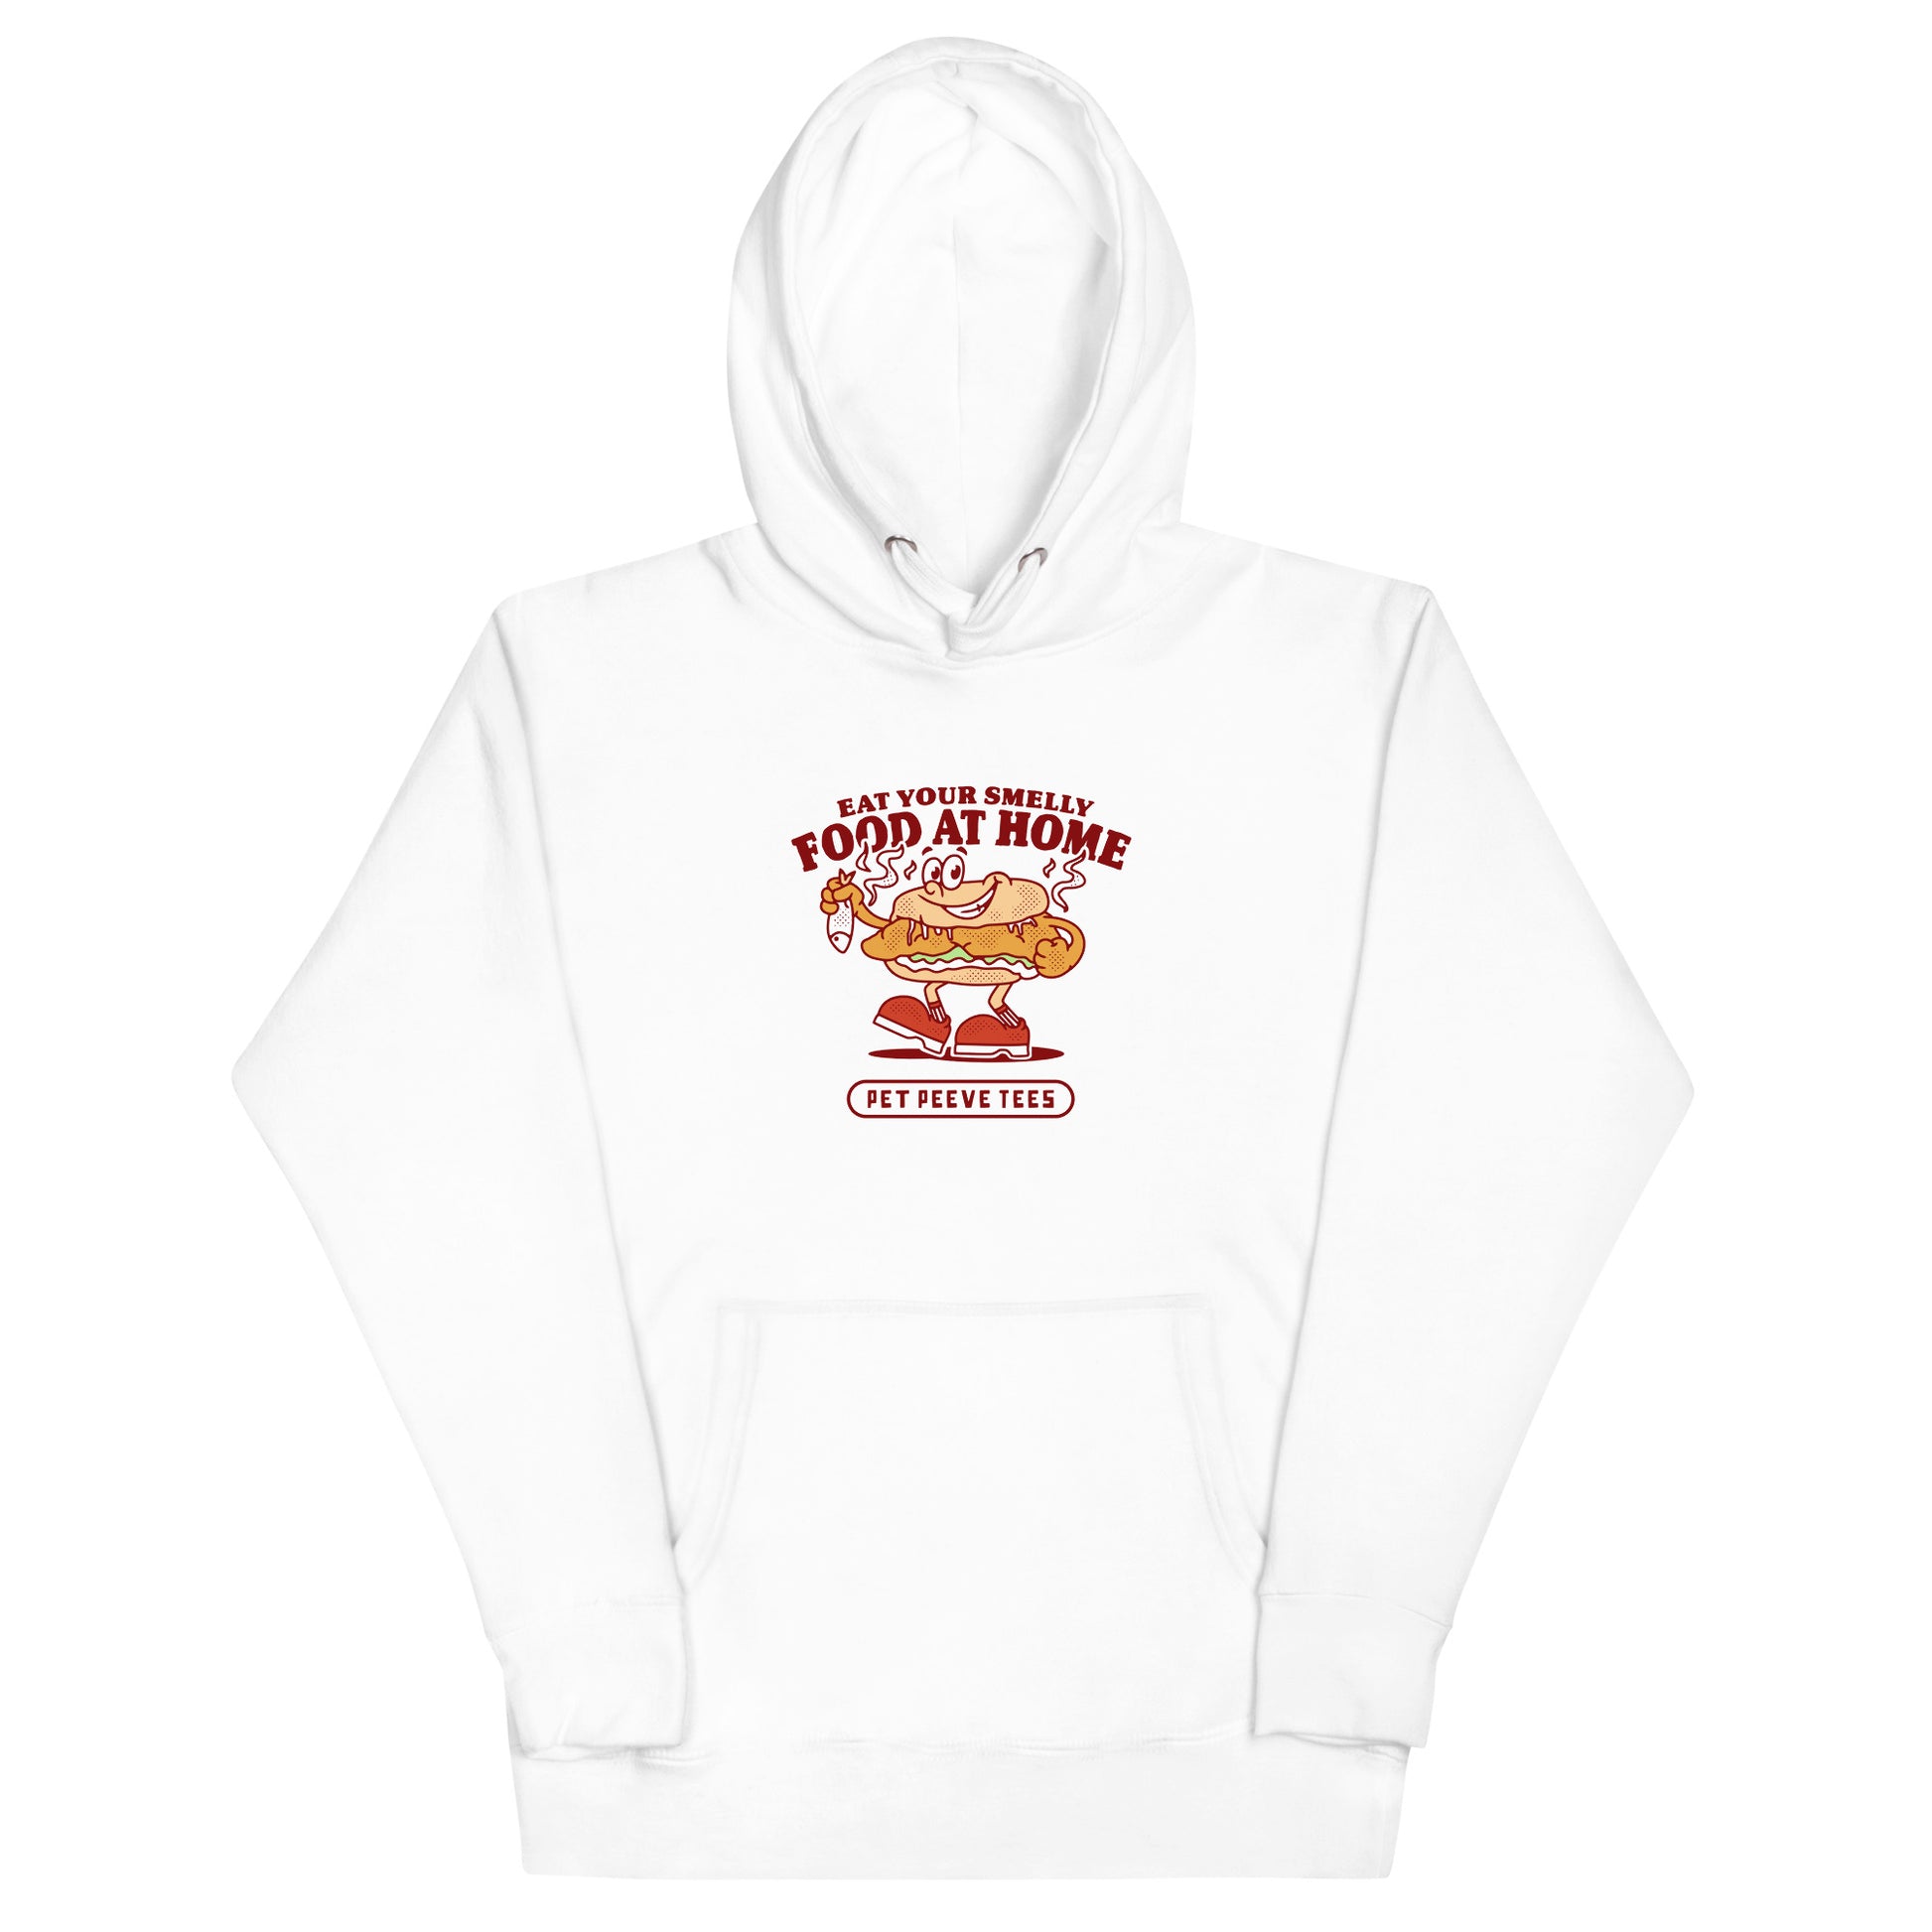 Eat Your Smelly Food At Home - Pet Peeve Tee - Unisex Hoodie